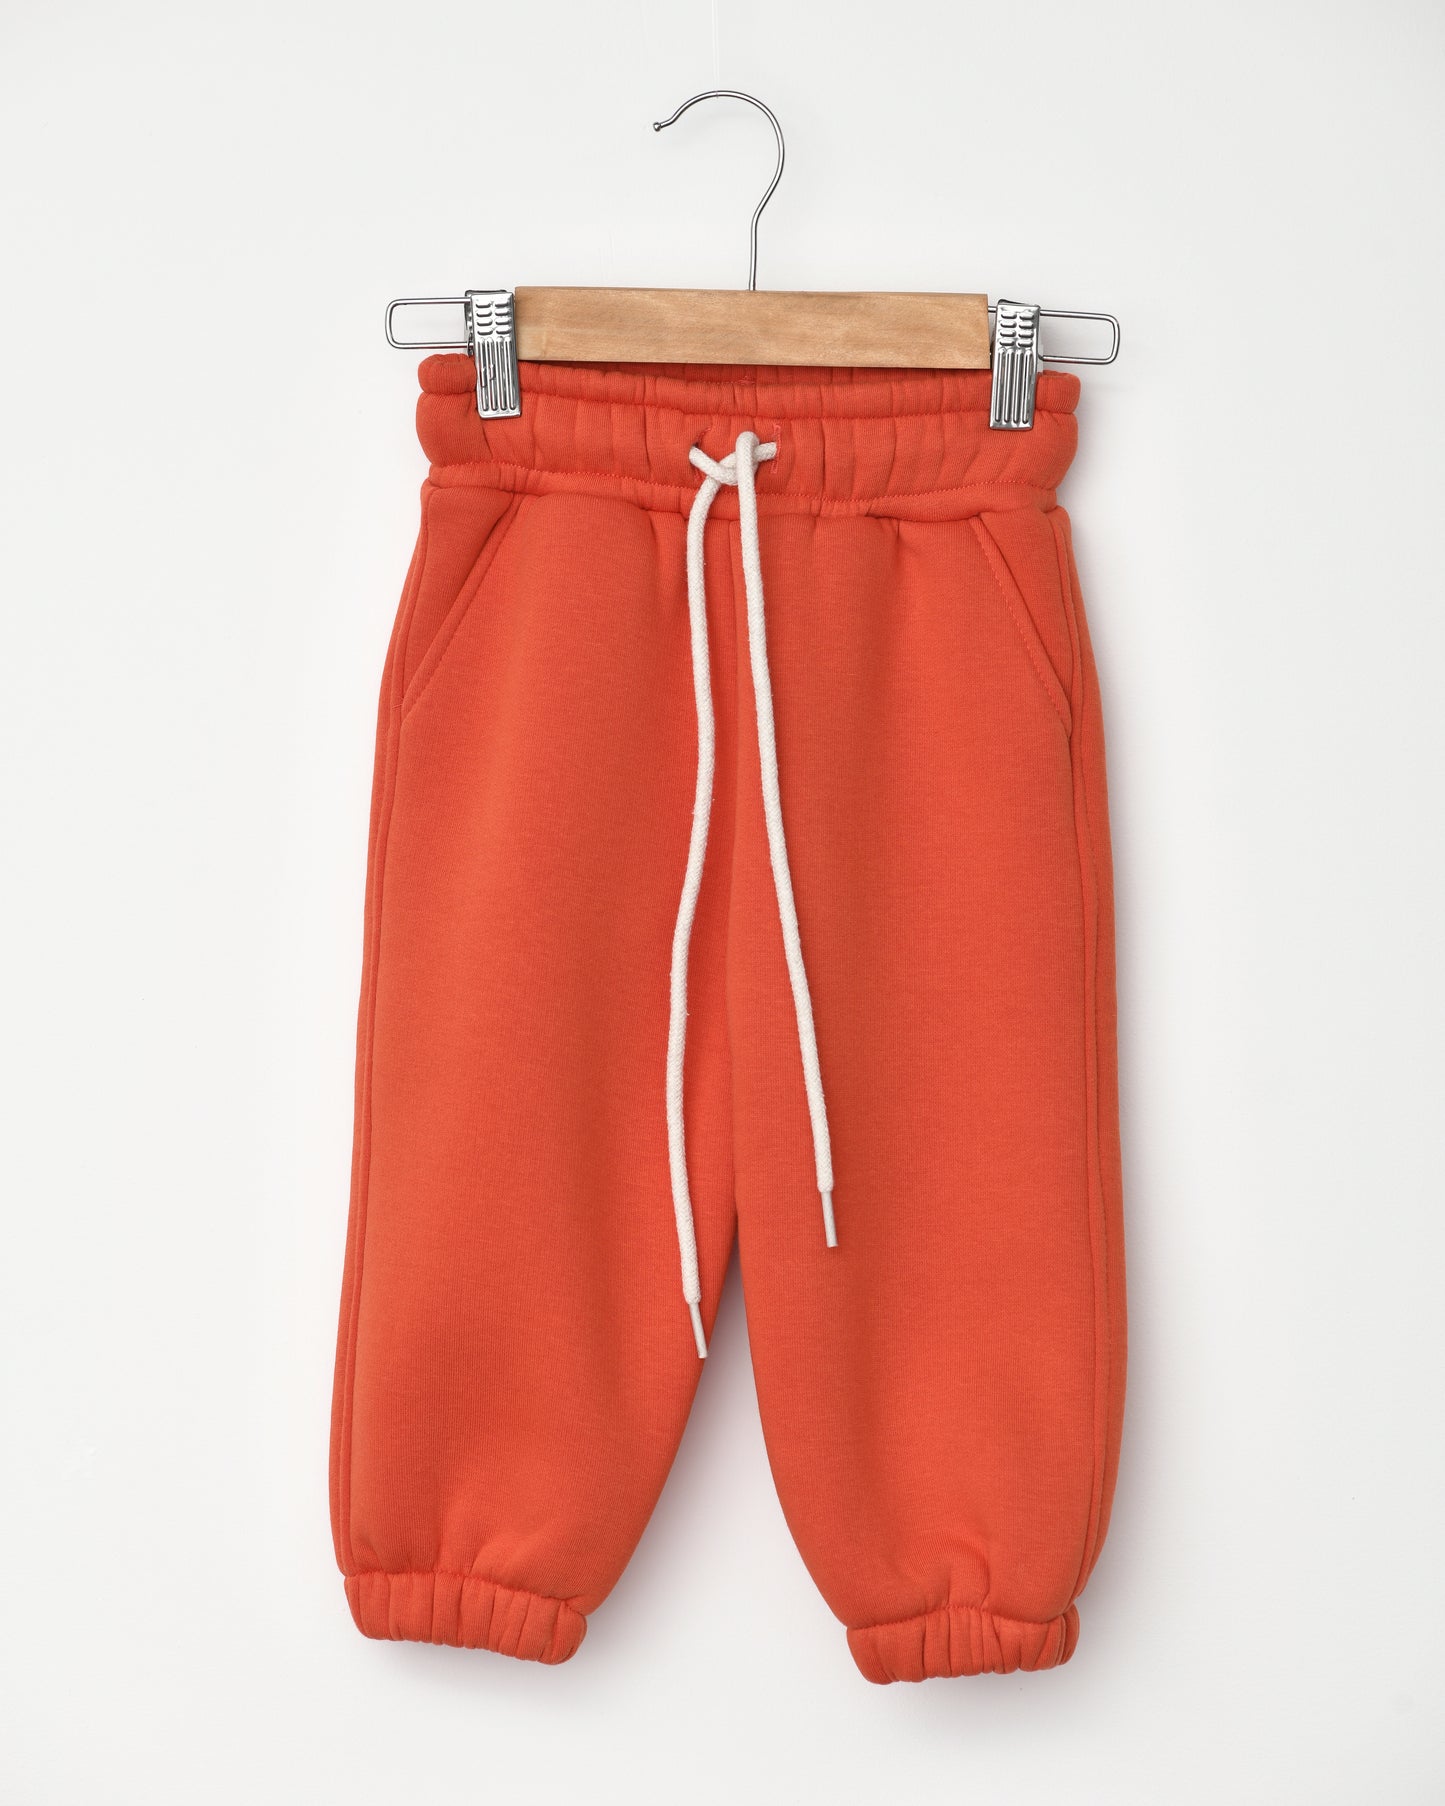 Colorful Pants for kids